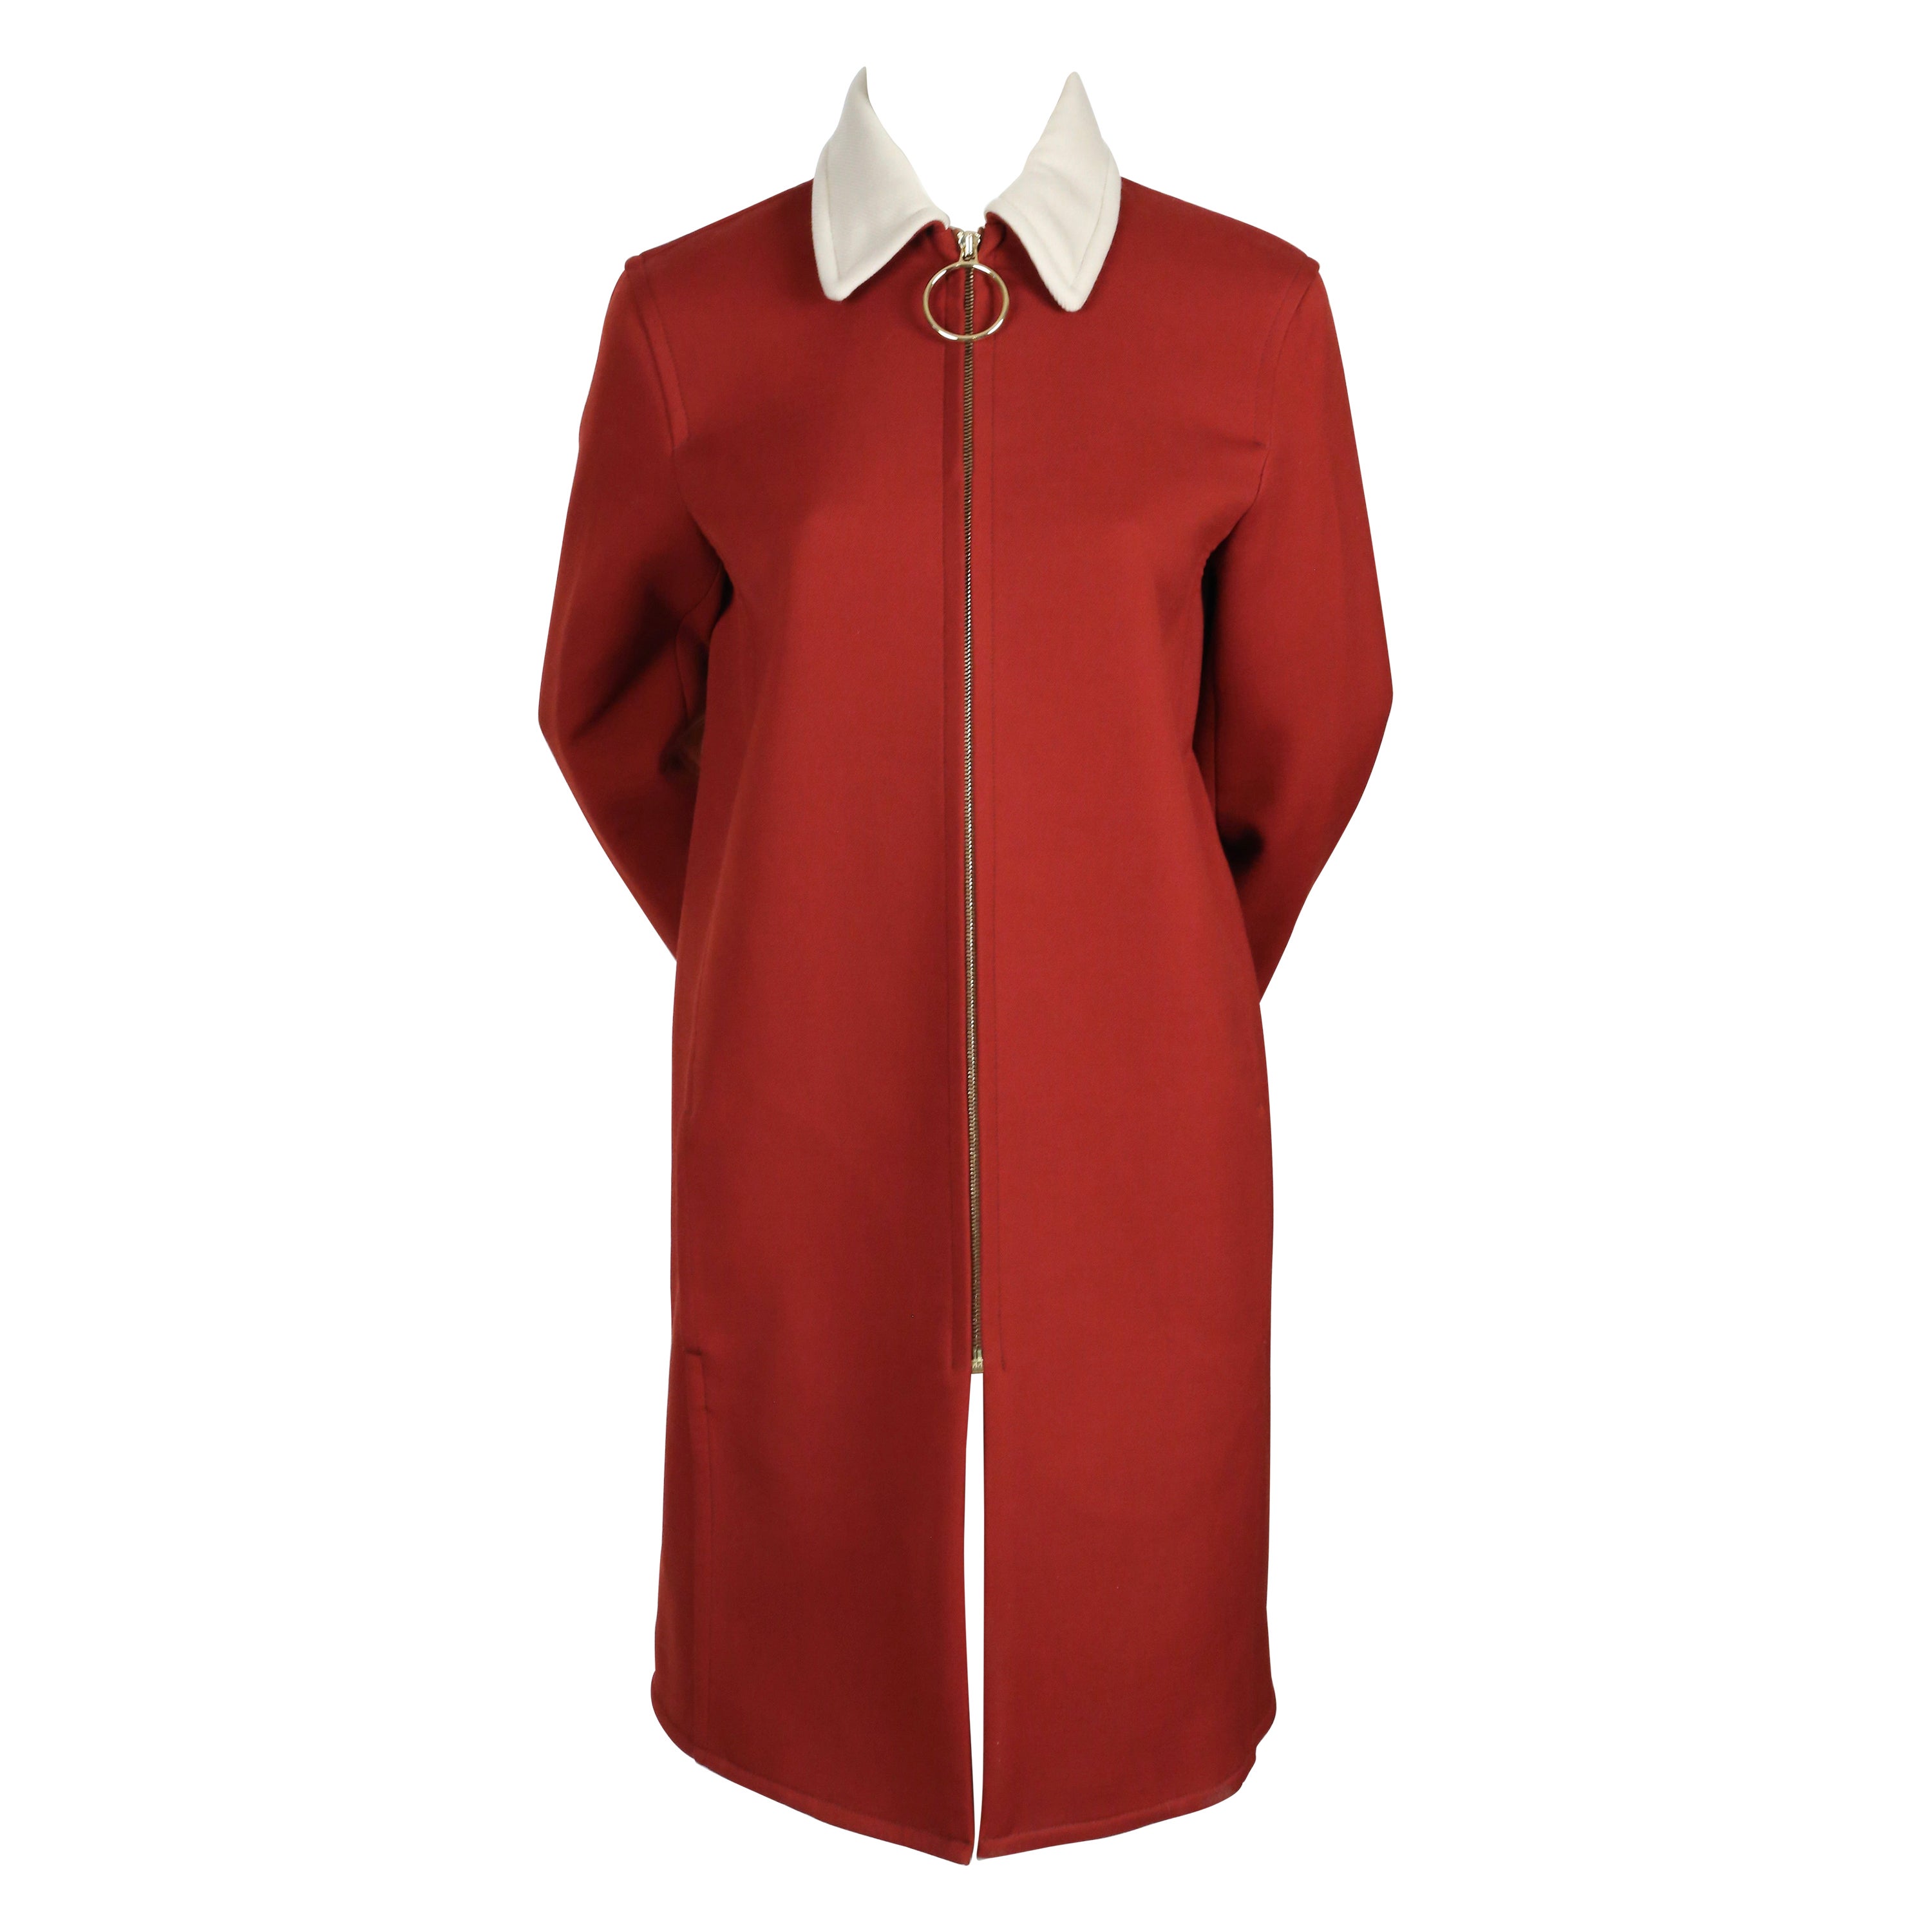 2015 CELINE by PHOEBE PHILO wool coat with O-ring zipper For Sale